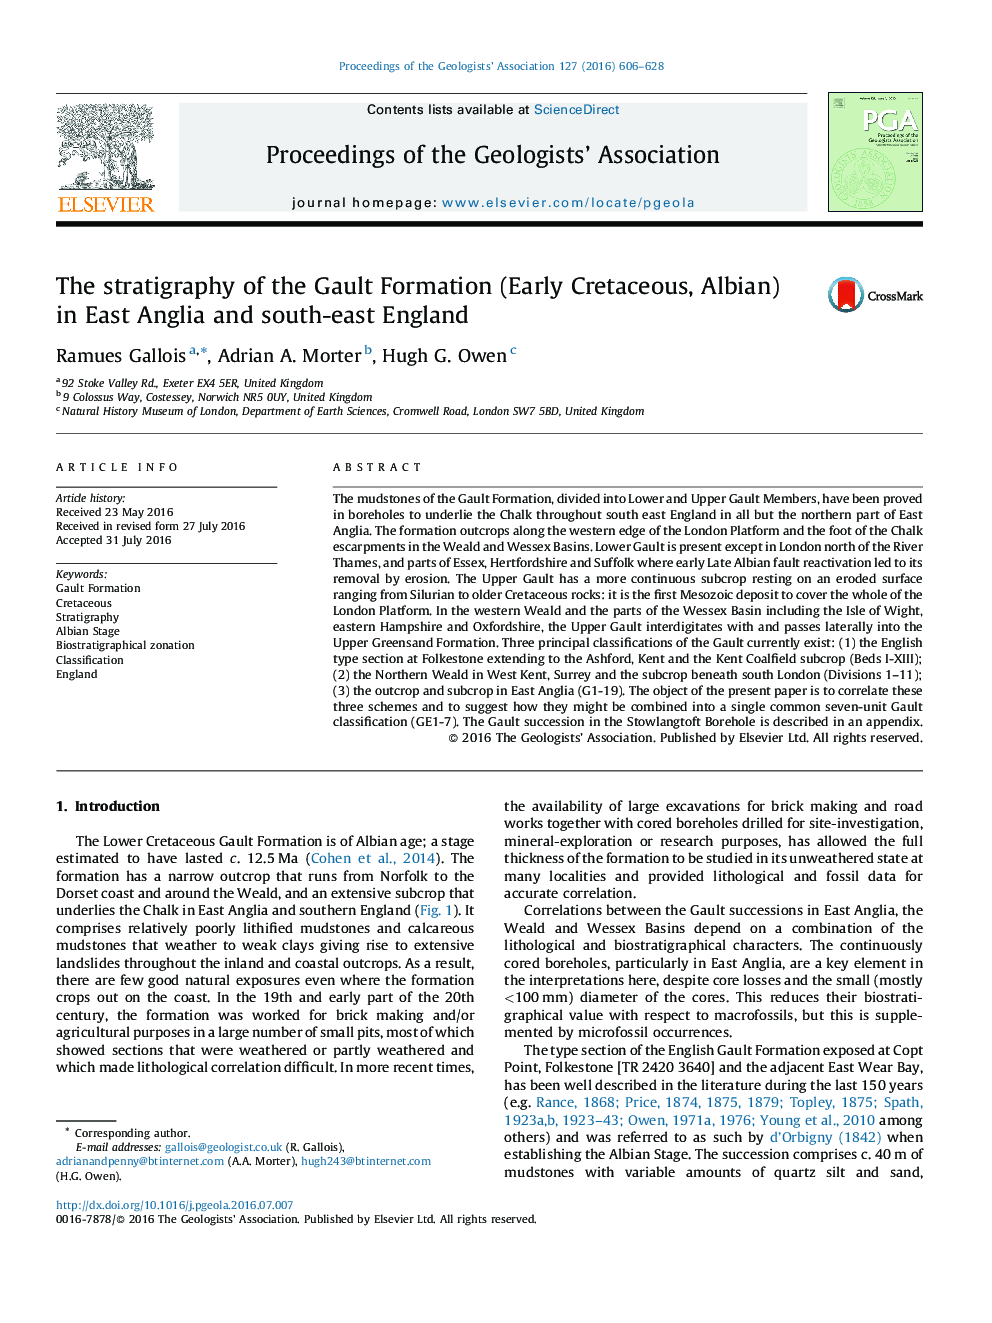 The stratigraphy of the Gault Formation (Early Cretaceous, Albian) in East Anglia and south-east England